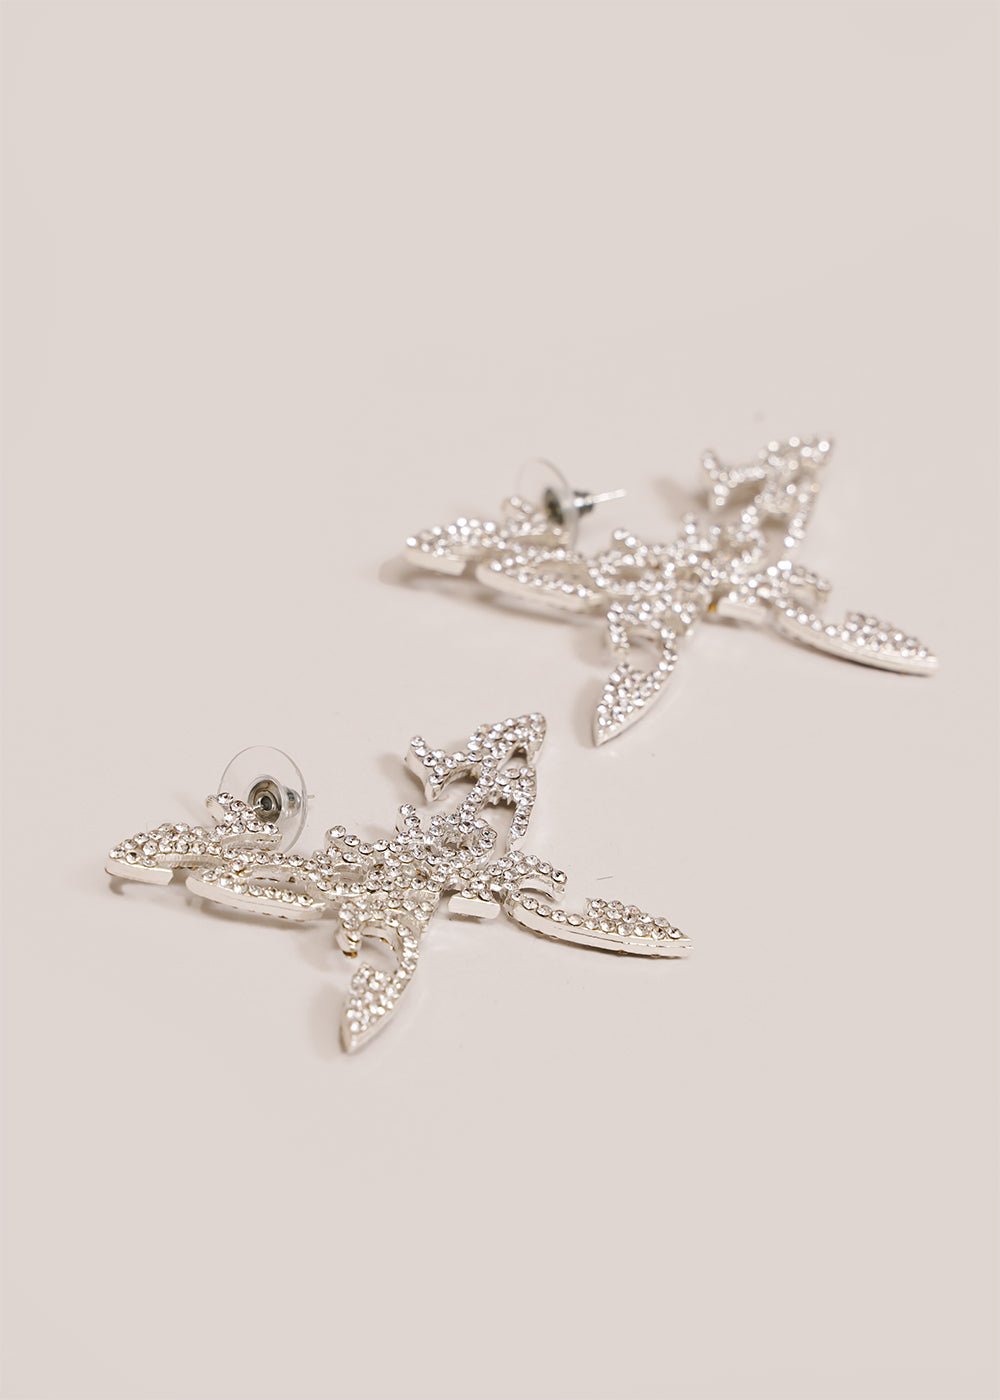 Collina Strada Silver Tattoo Butterfly Earrings - New Classics Studios Sustainable Ethical Fashion Canada